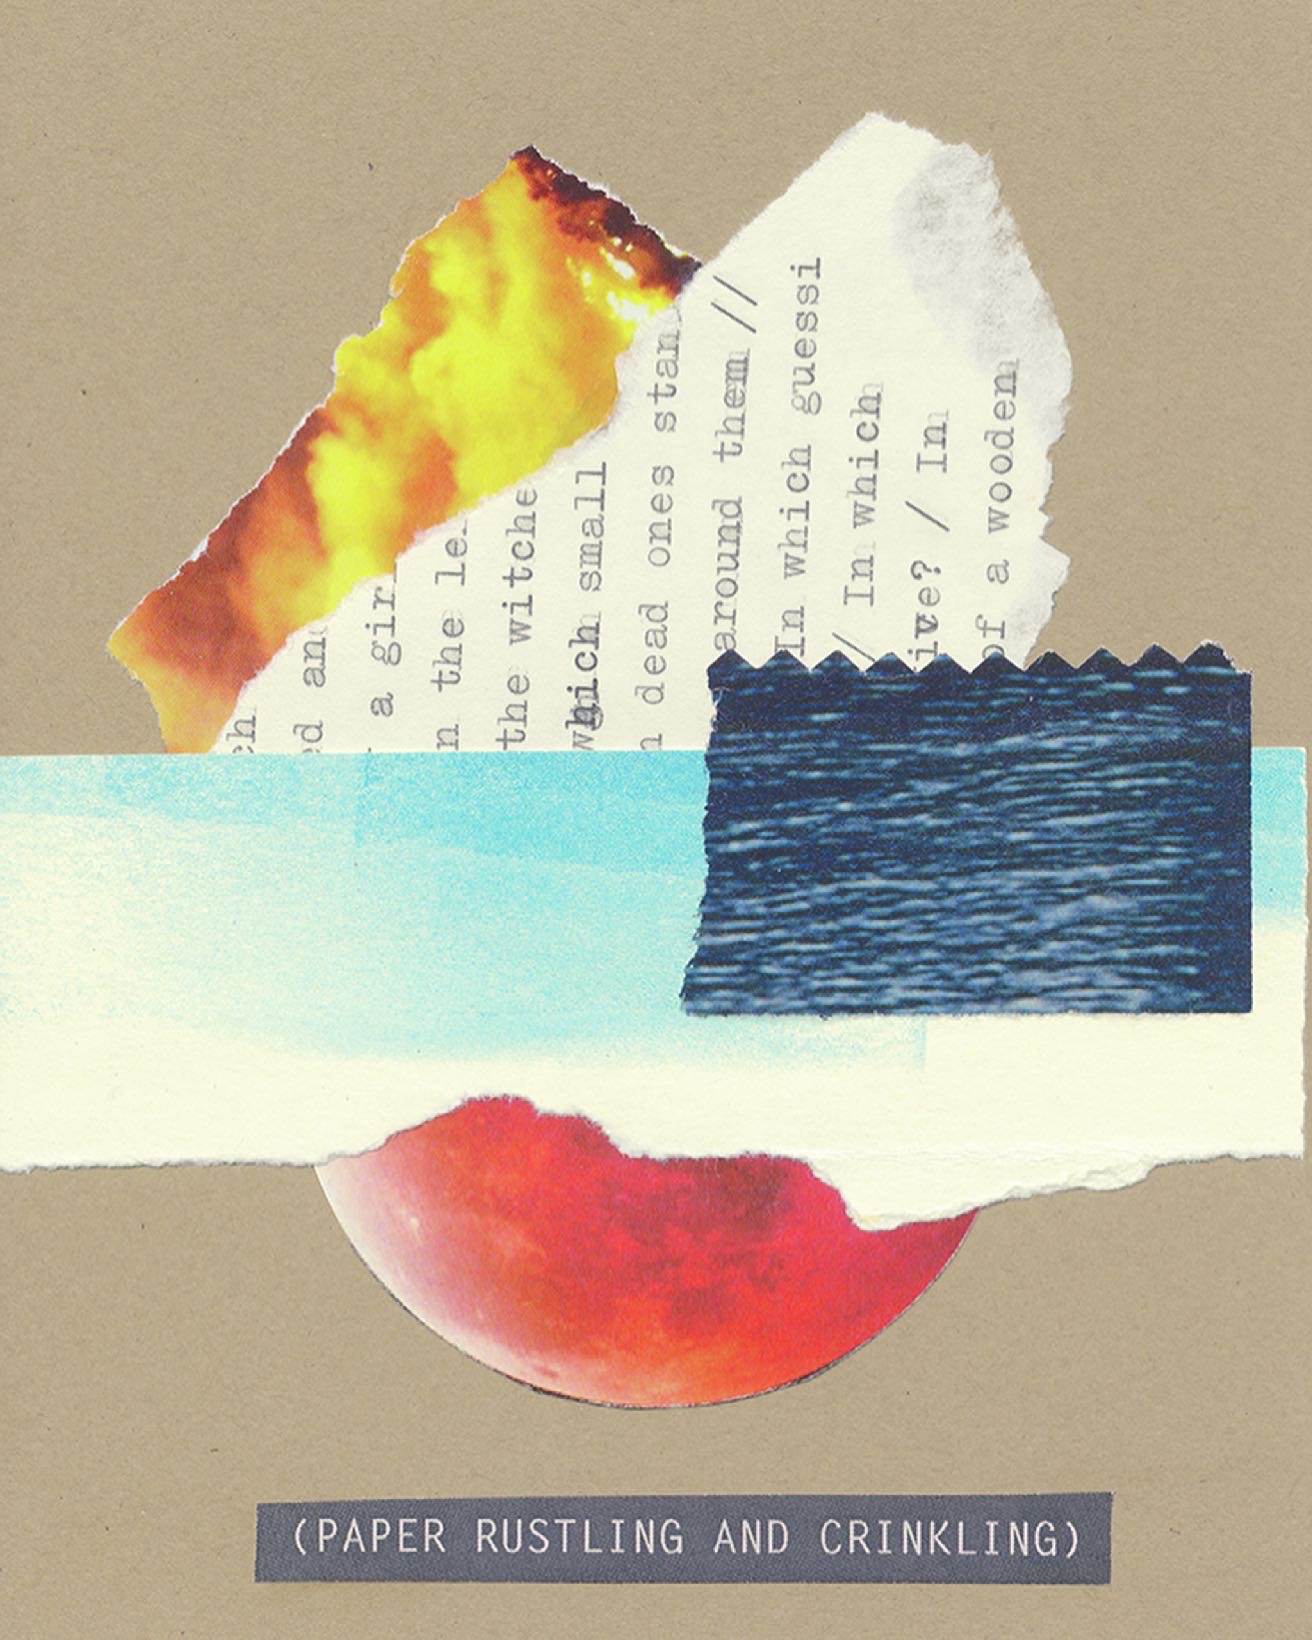 The original collage called (PAPER RUSTLING AND CRINKLING) on kraft-brown card featuring an arrangement of cut or torn pieces including flames, a typescript, dark blue ocean waves, and aqua ink swipes on top of a red planet. The title appears below the collage in the style of a closed caption.